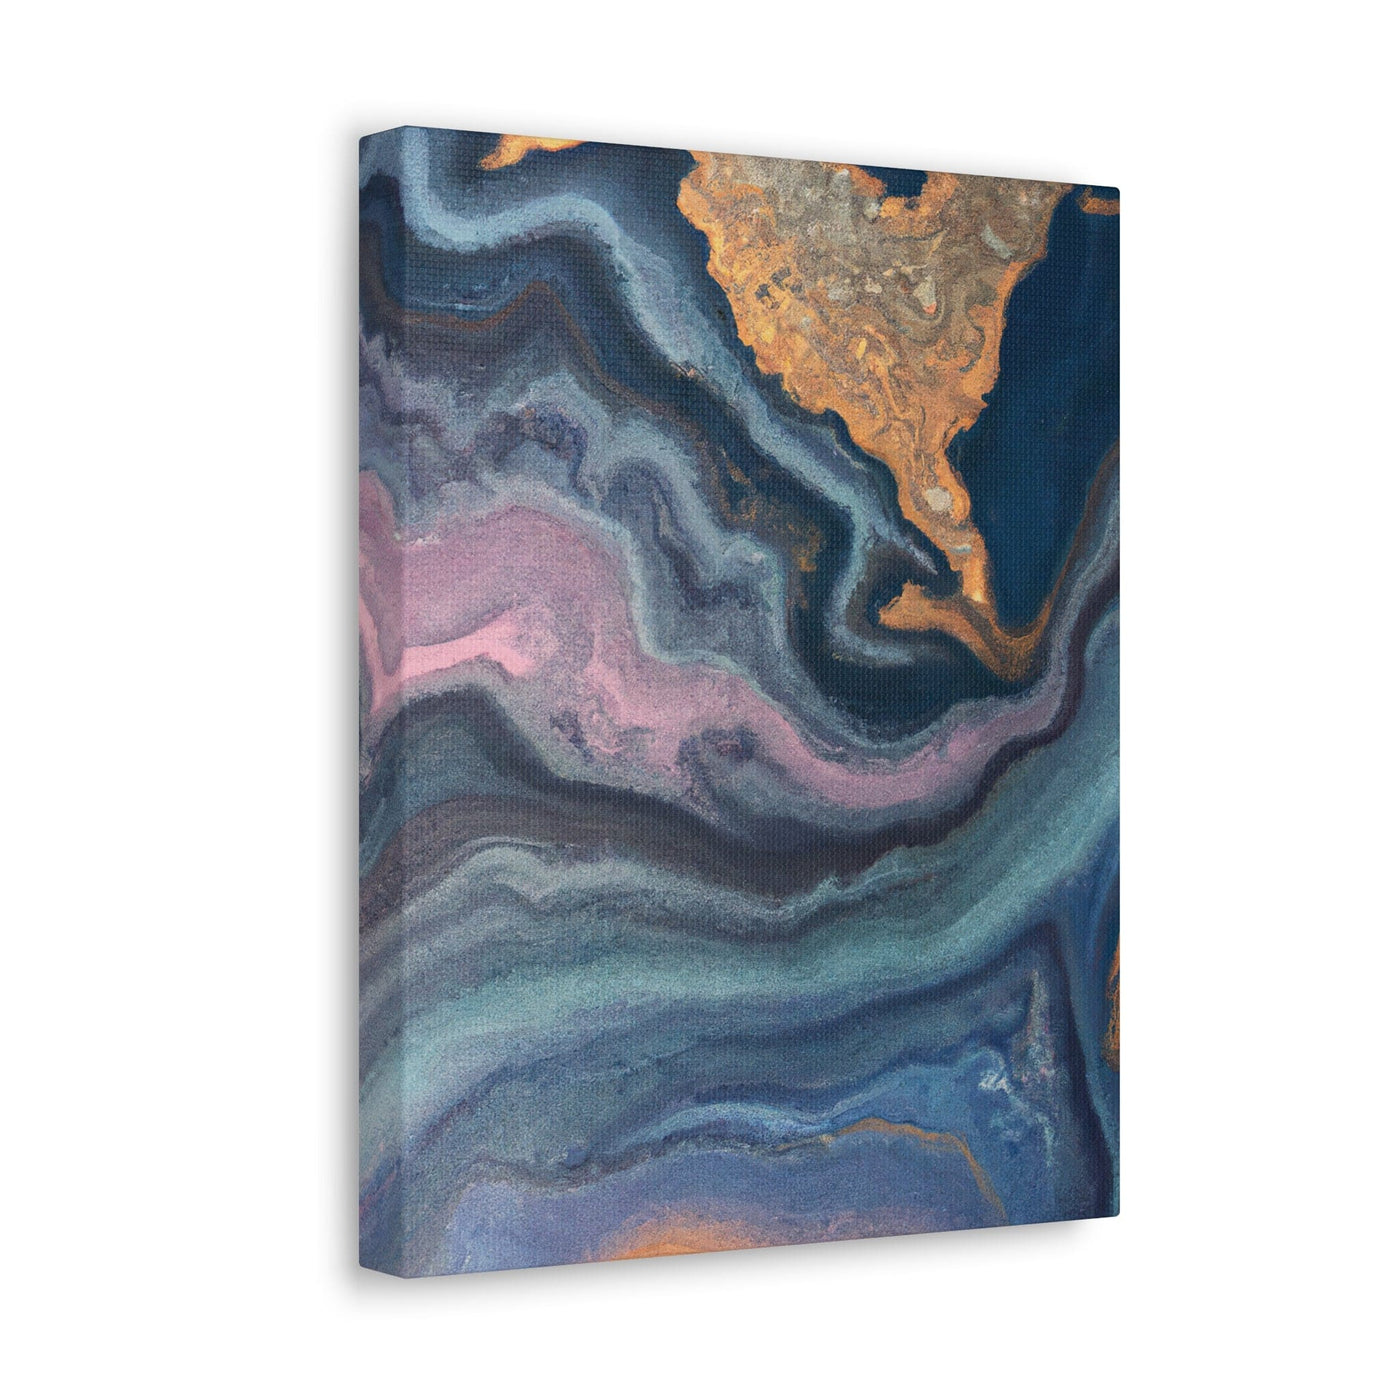 Wall Art Decor Canvas Print Artwork Blue Pink Gold Abstract Marble Swirl